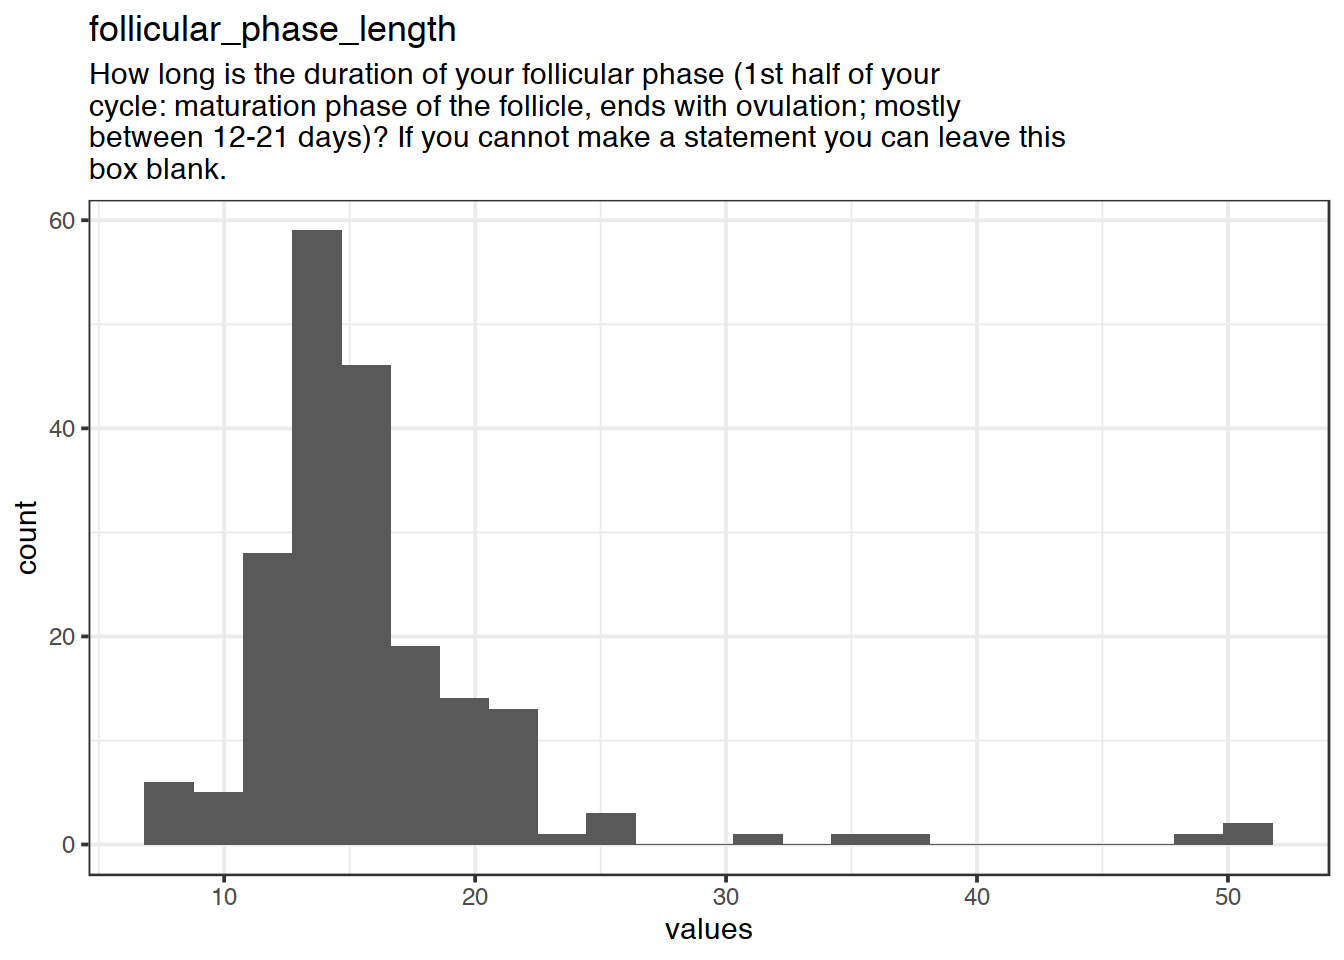 Distribution of values for follicular_phase_length